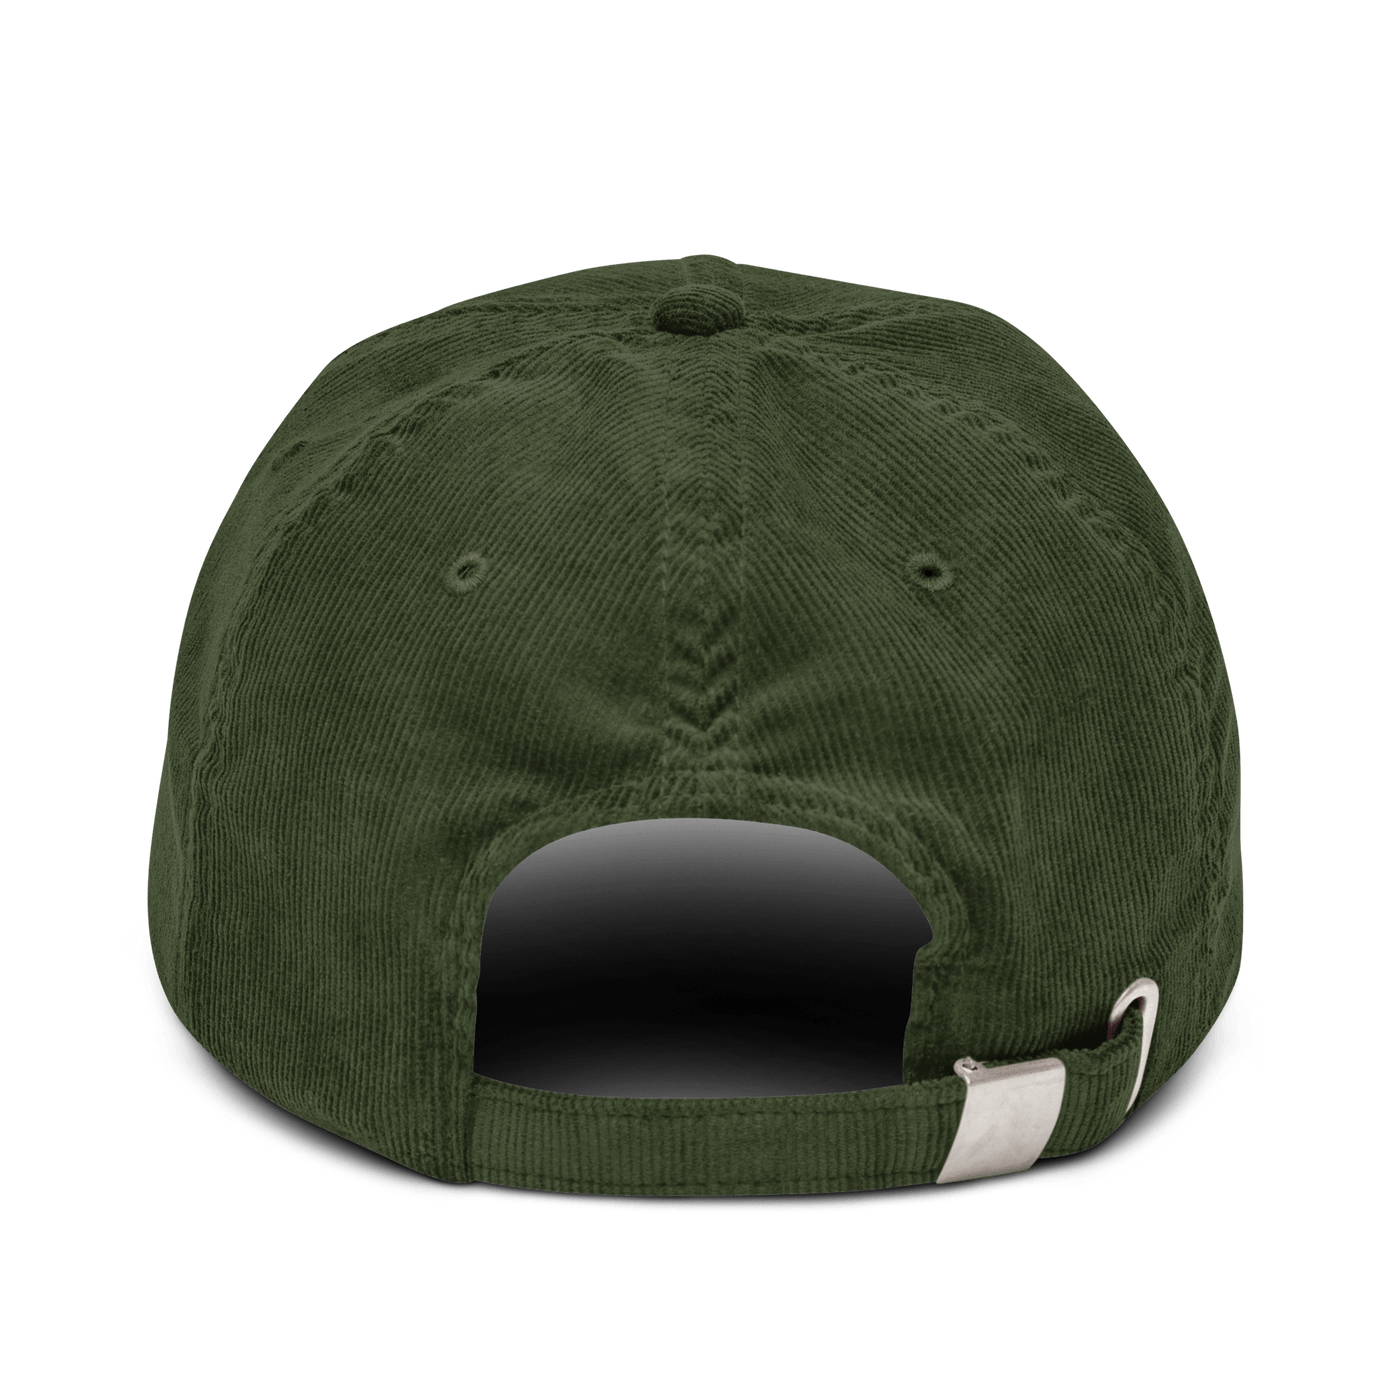 Very famous on internet Corduroy hat - Dark Olive - - Just Another Cap Store